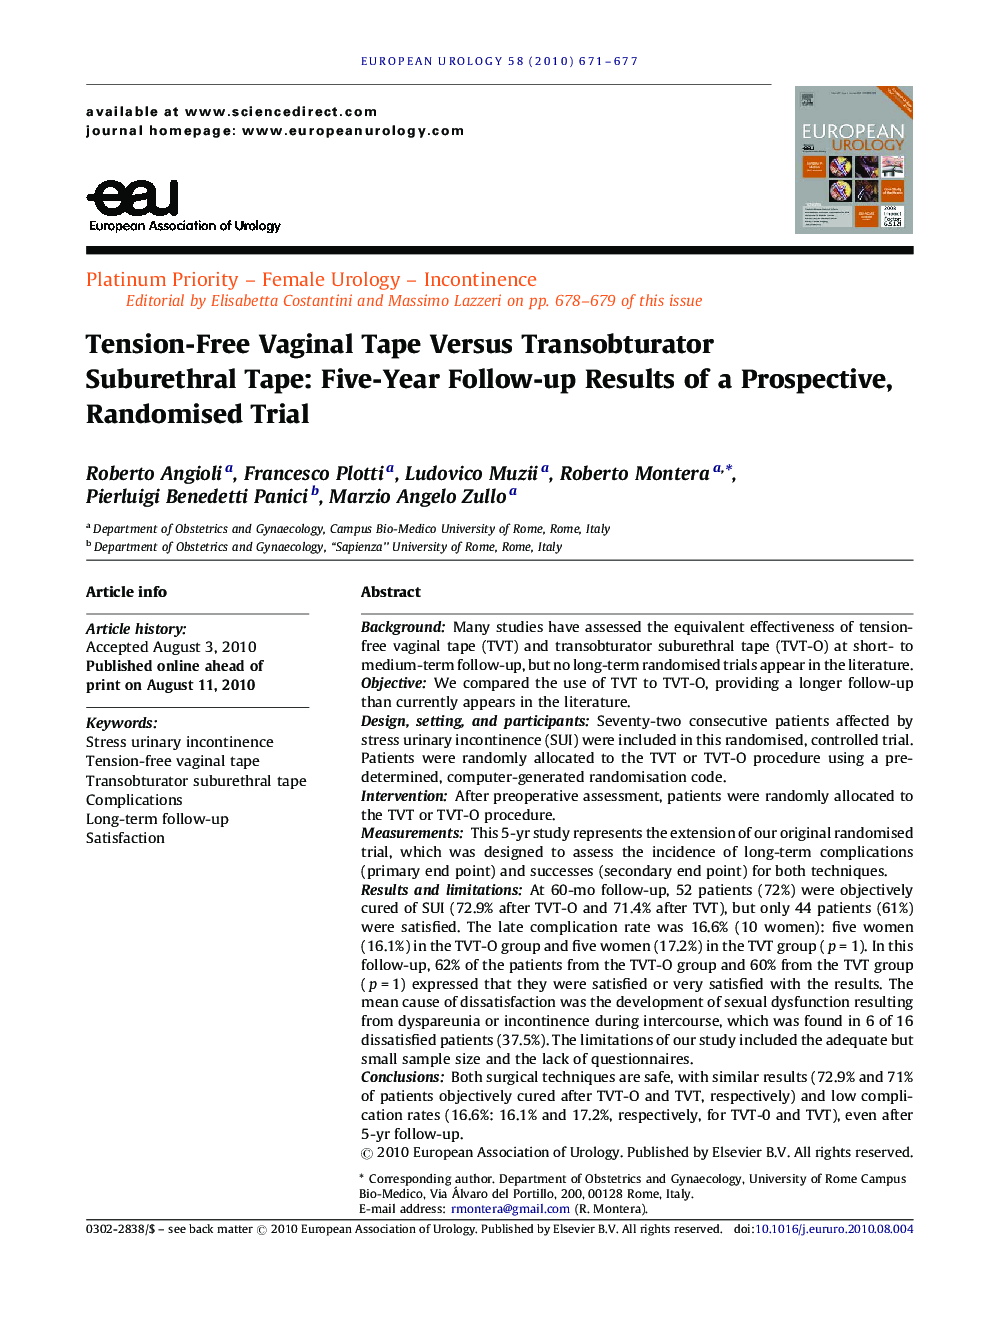 Tension-Free Vaginal Tape Versus Transobturator Suburethral Tape: Five-Year Follow-up Results of a Prospective, Randomised Trial